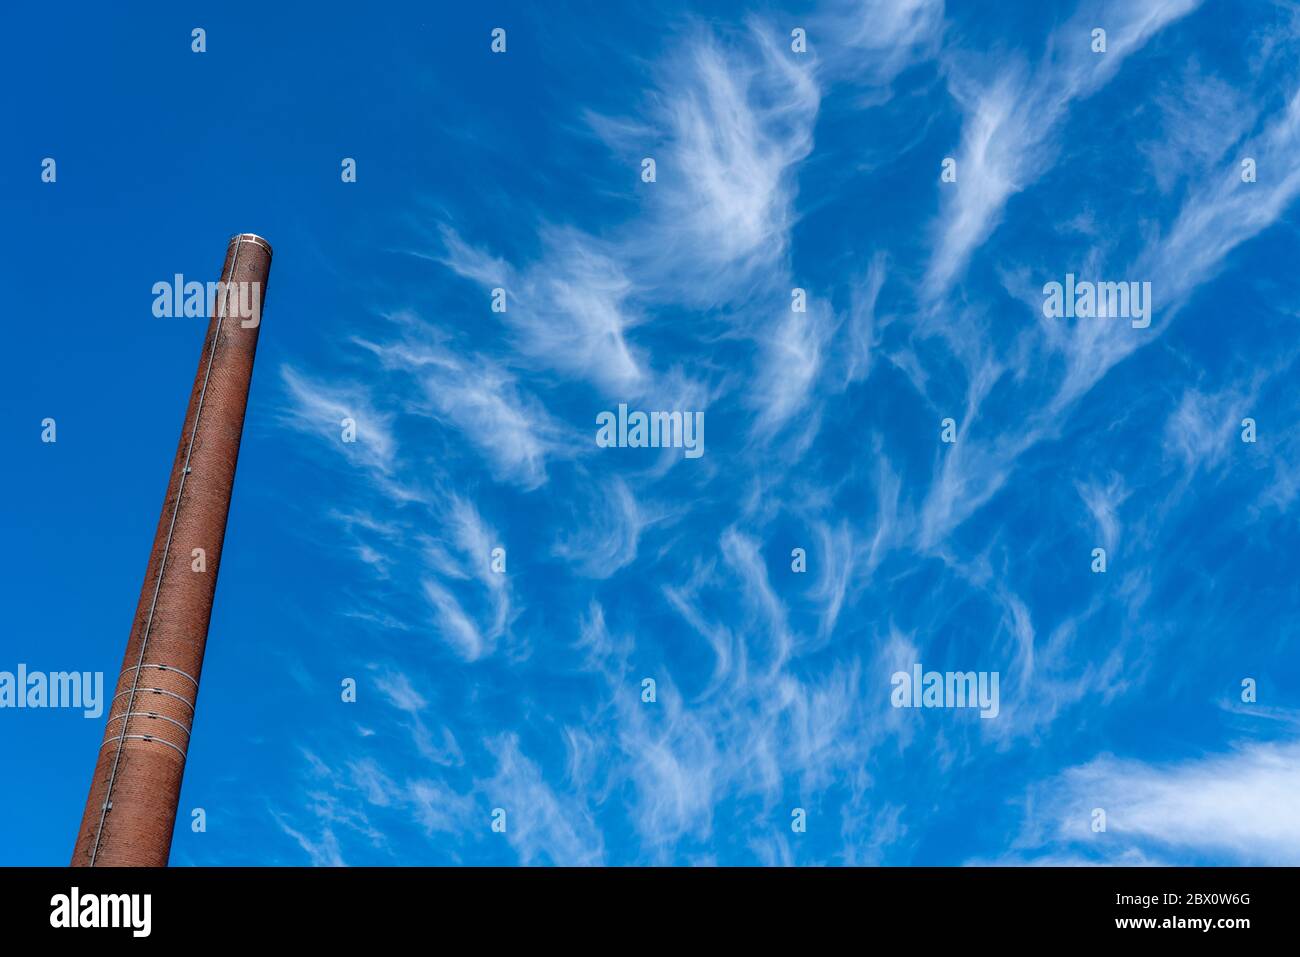 Blue sky with cirrus clouds, filigree ice clouds at high altitude, harbingers of warmer weather, chimneys, emissions Stock Photo